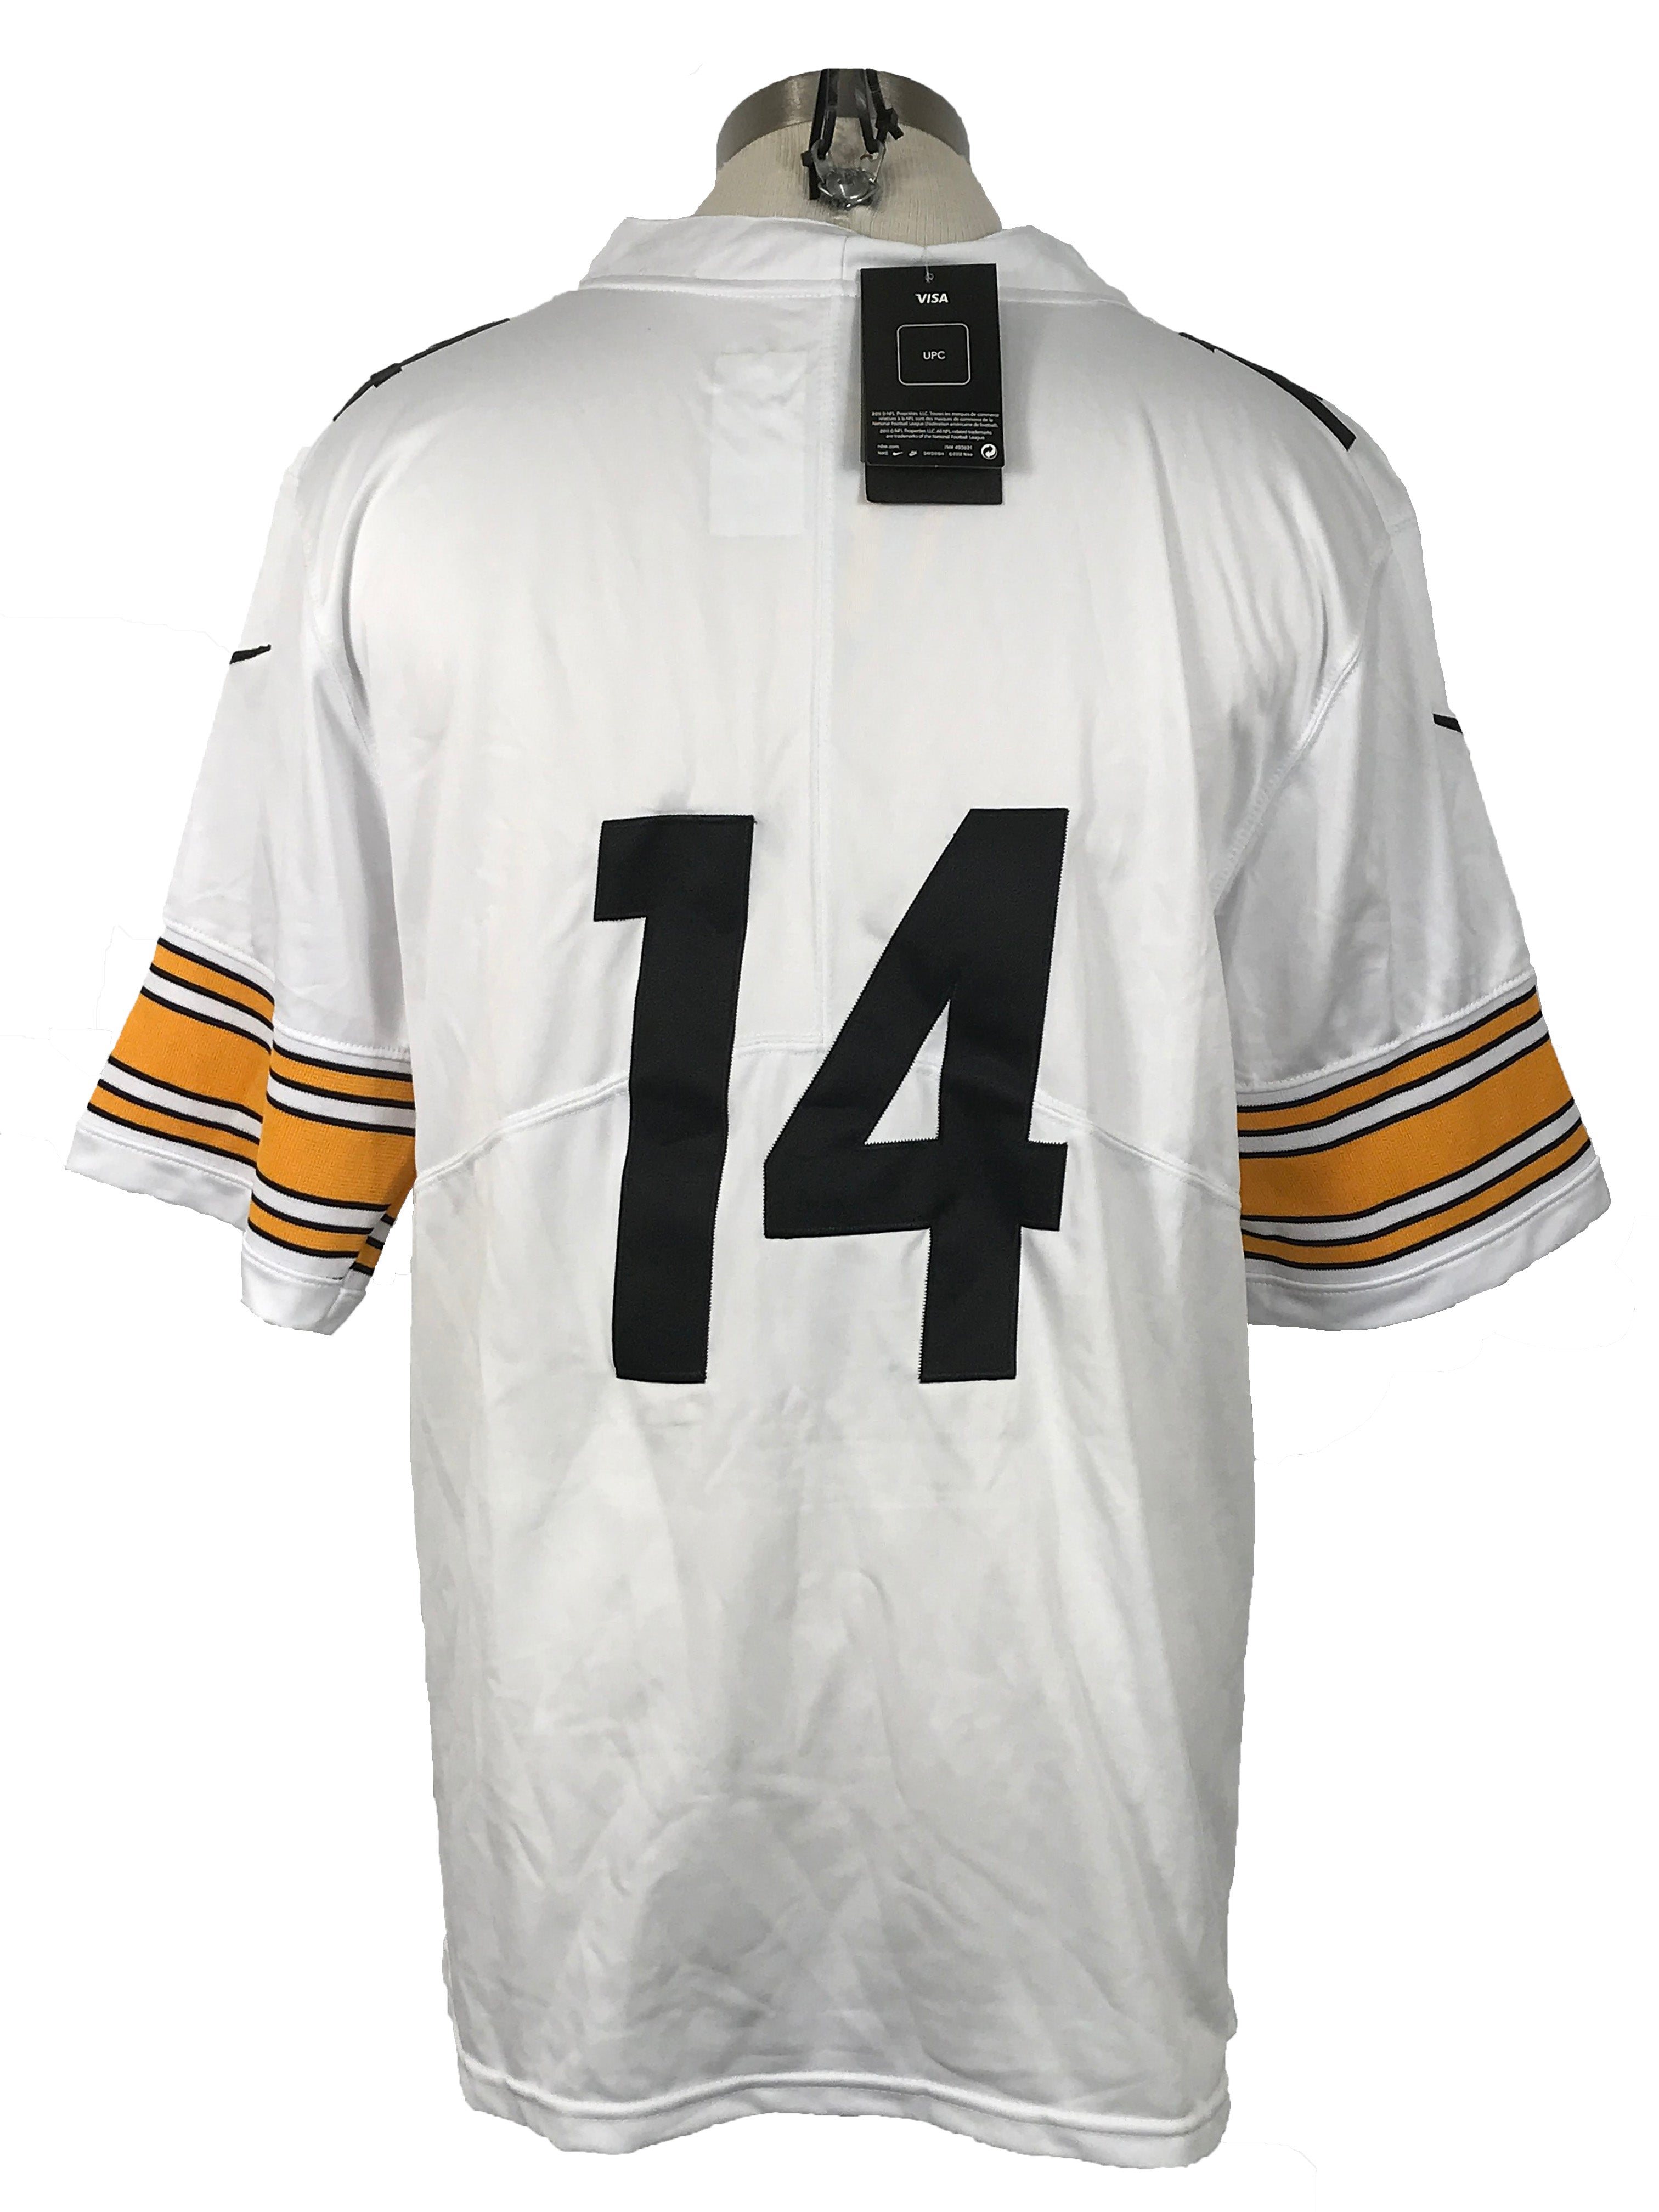 Nike White Pittsburgh Steelers #14 Jersey Men's Size L